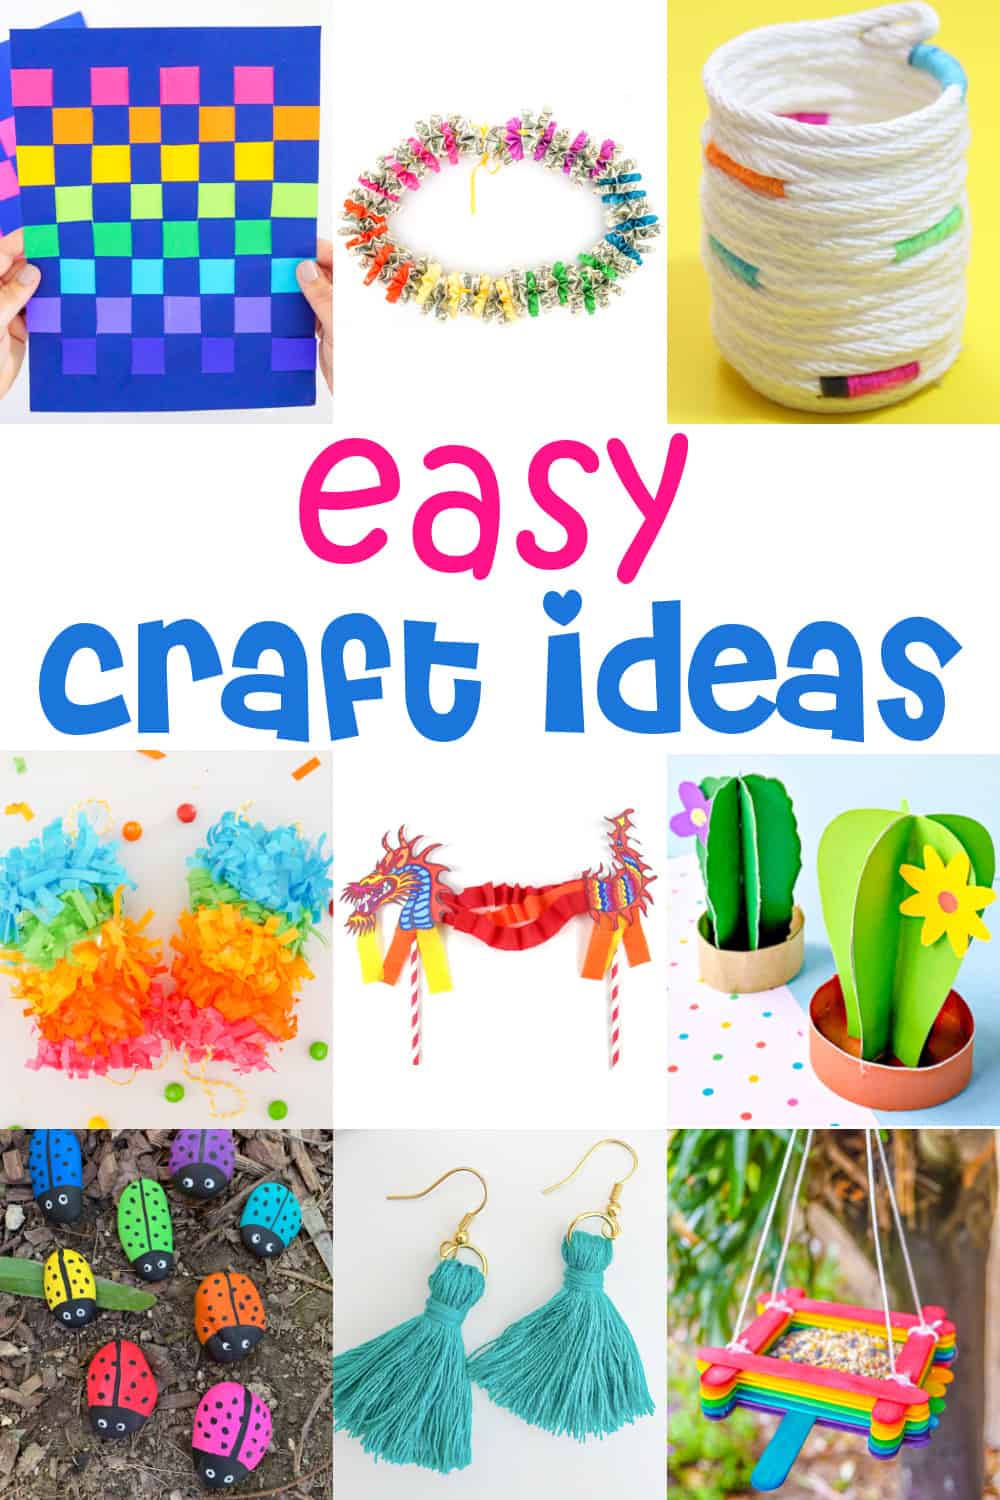 50 Amazingly Fun Crafts for Kids! - How Wee Learn